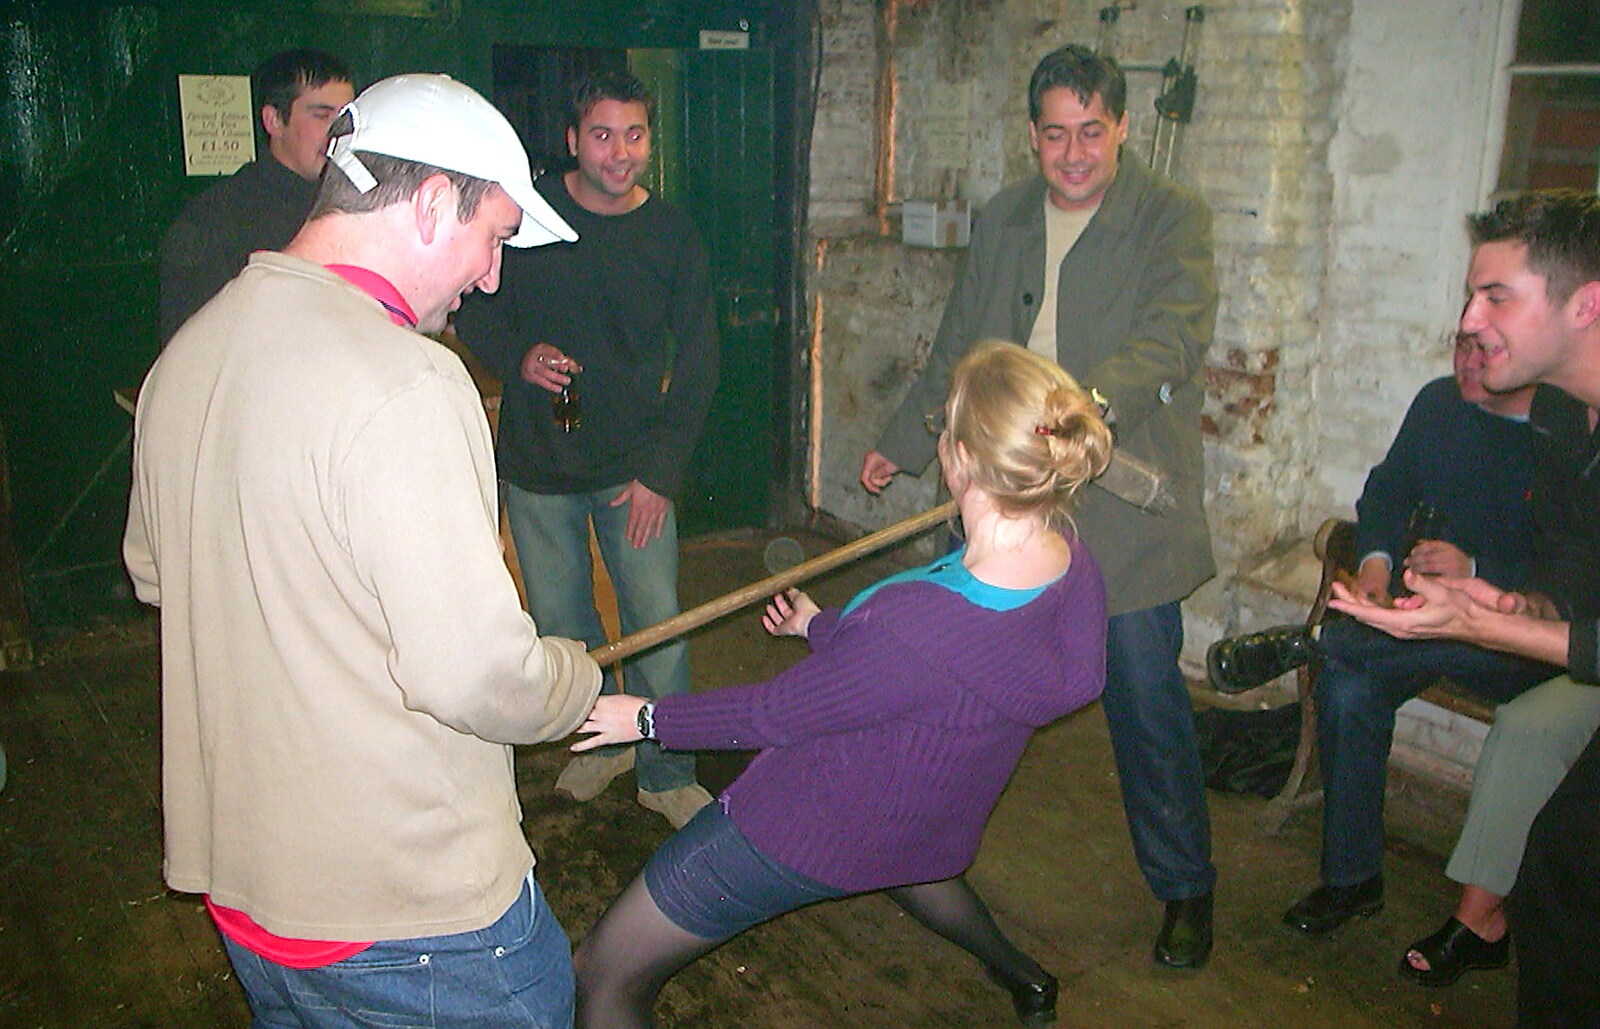 Some limbo dancing occurs from The Hoxne Beer Festival, Suffolk - 20th May 2002